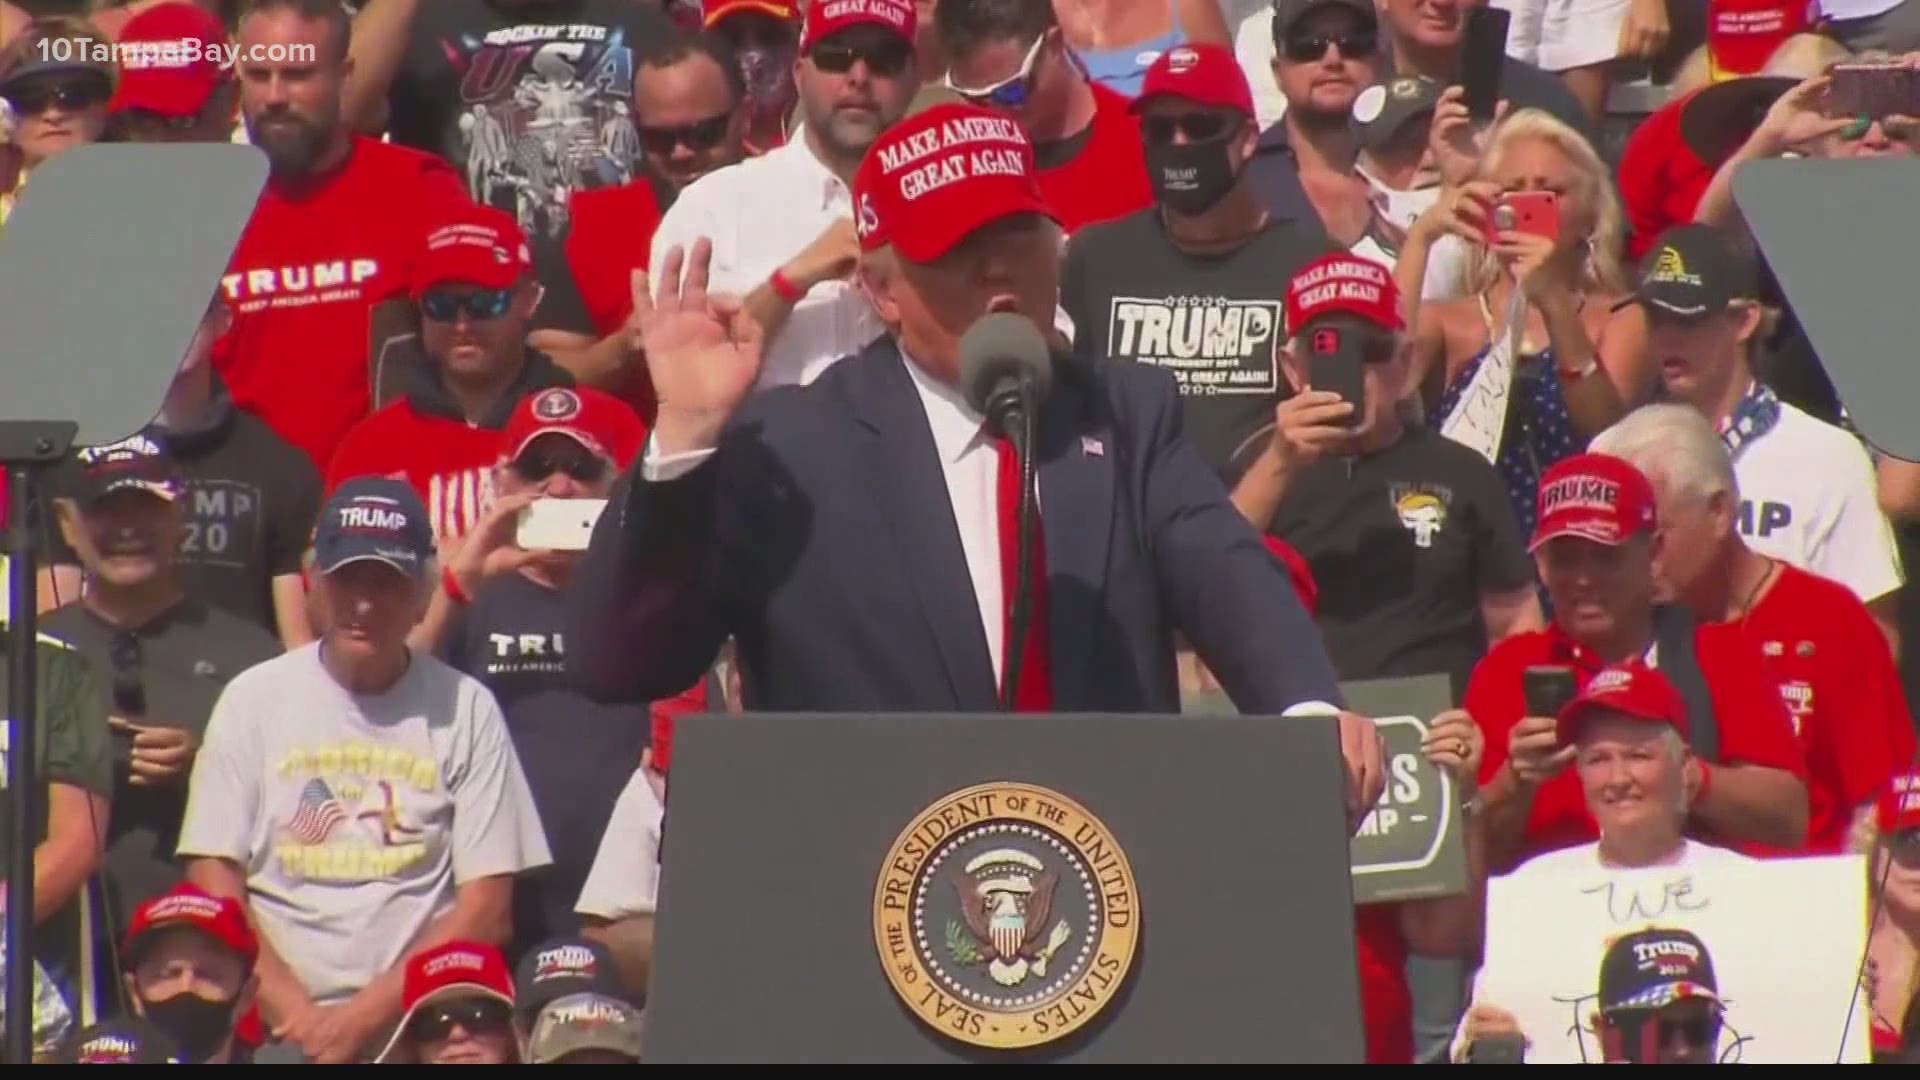 President Trump and first lady Melania spoke to a packed crowd of supporters in the north lot of Raymond James Stadium, days before the Nov. 3 election.